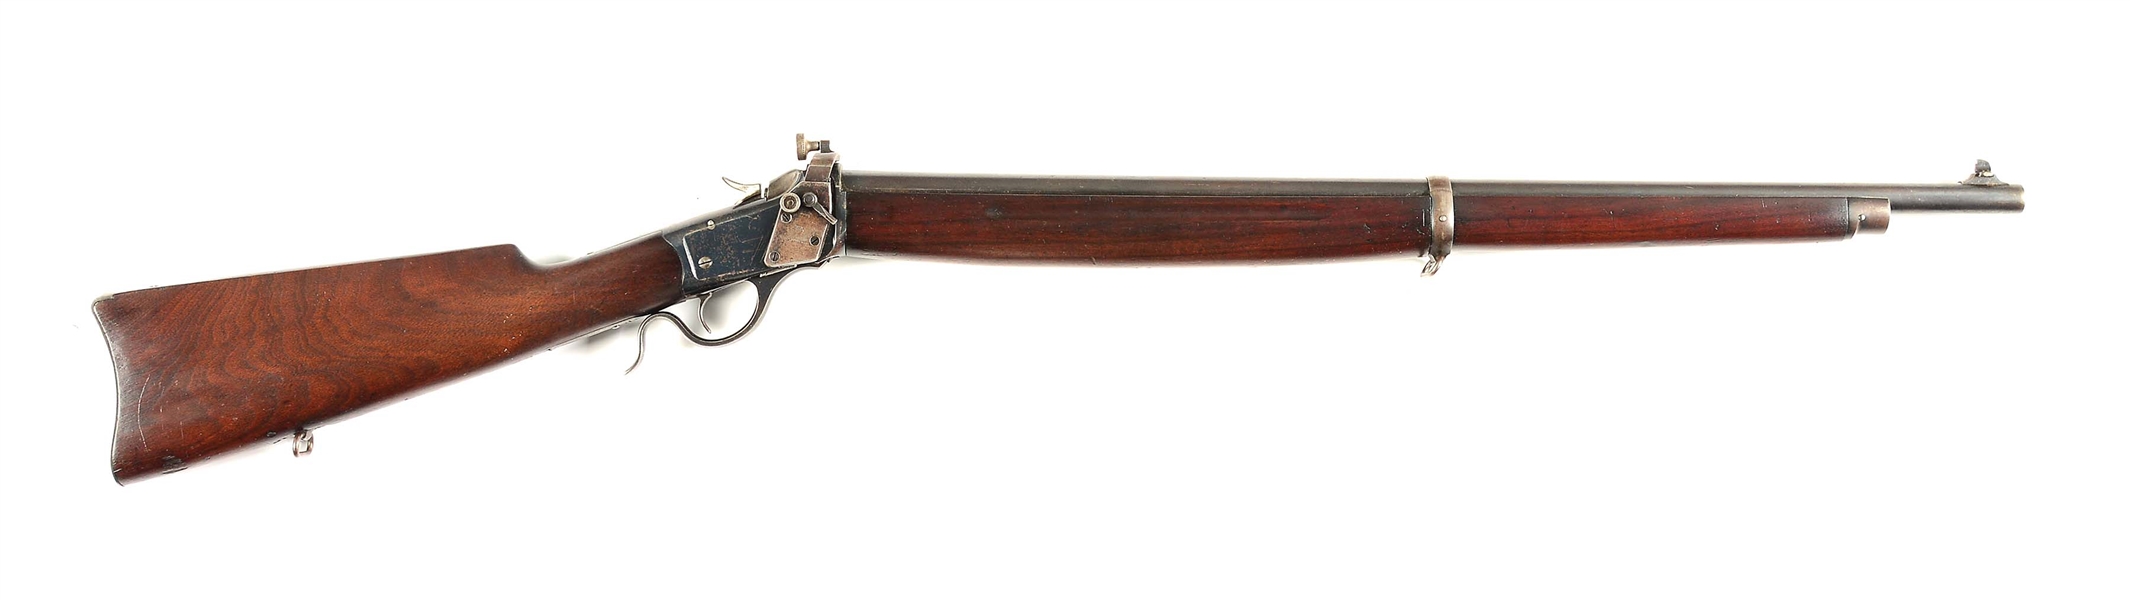 (C) MARTIALLY MARKED WINCHESTER "WINDER" MUSKET 